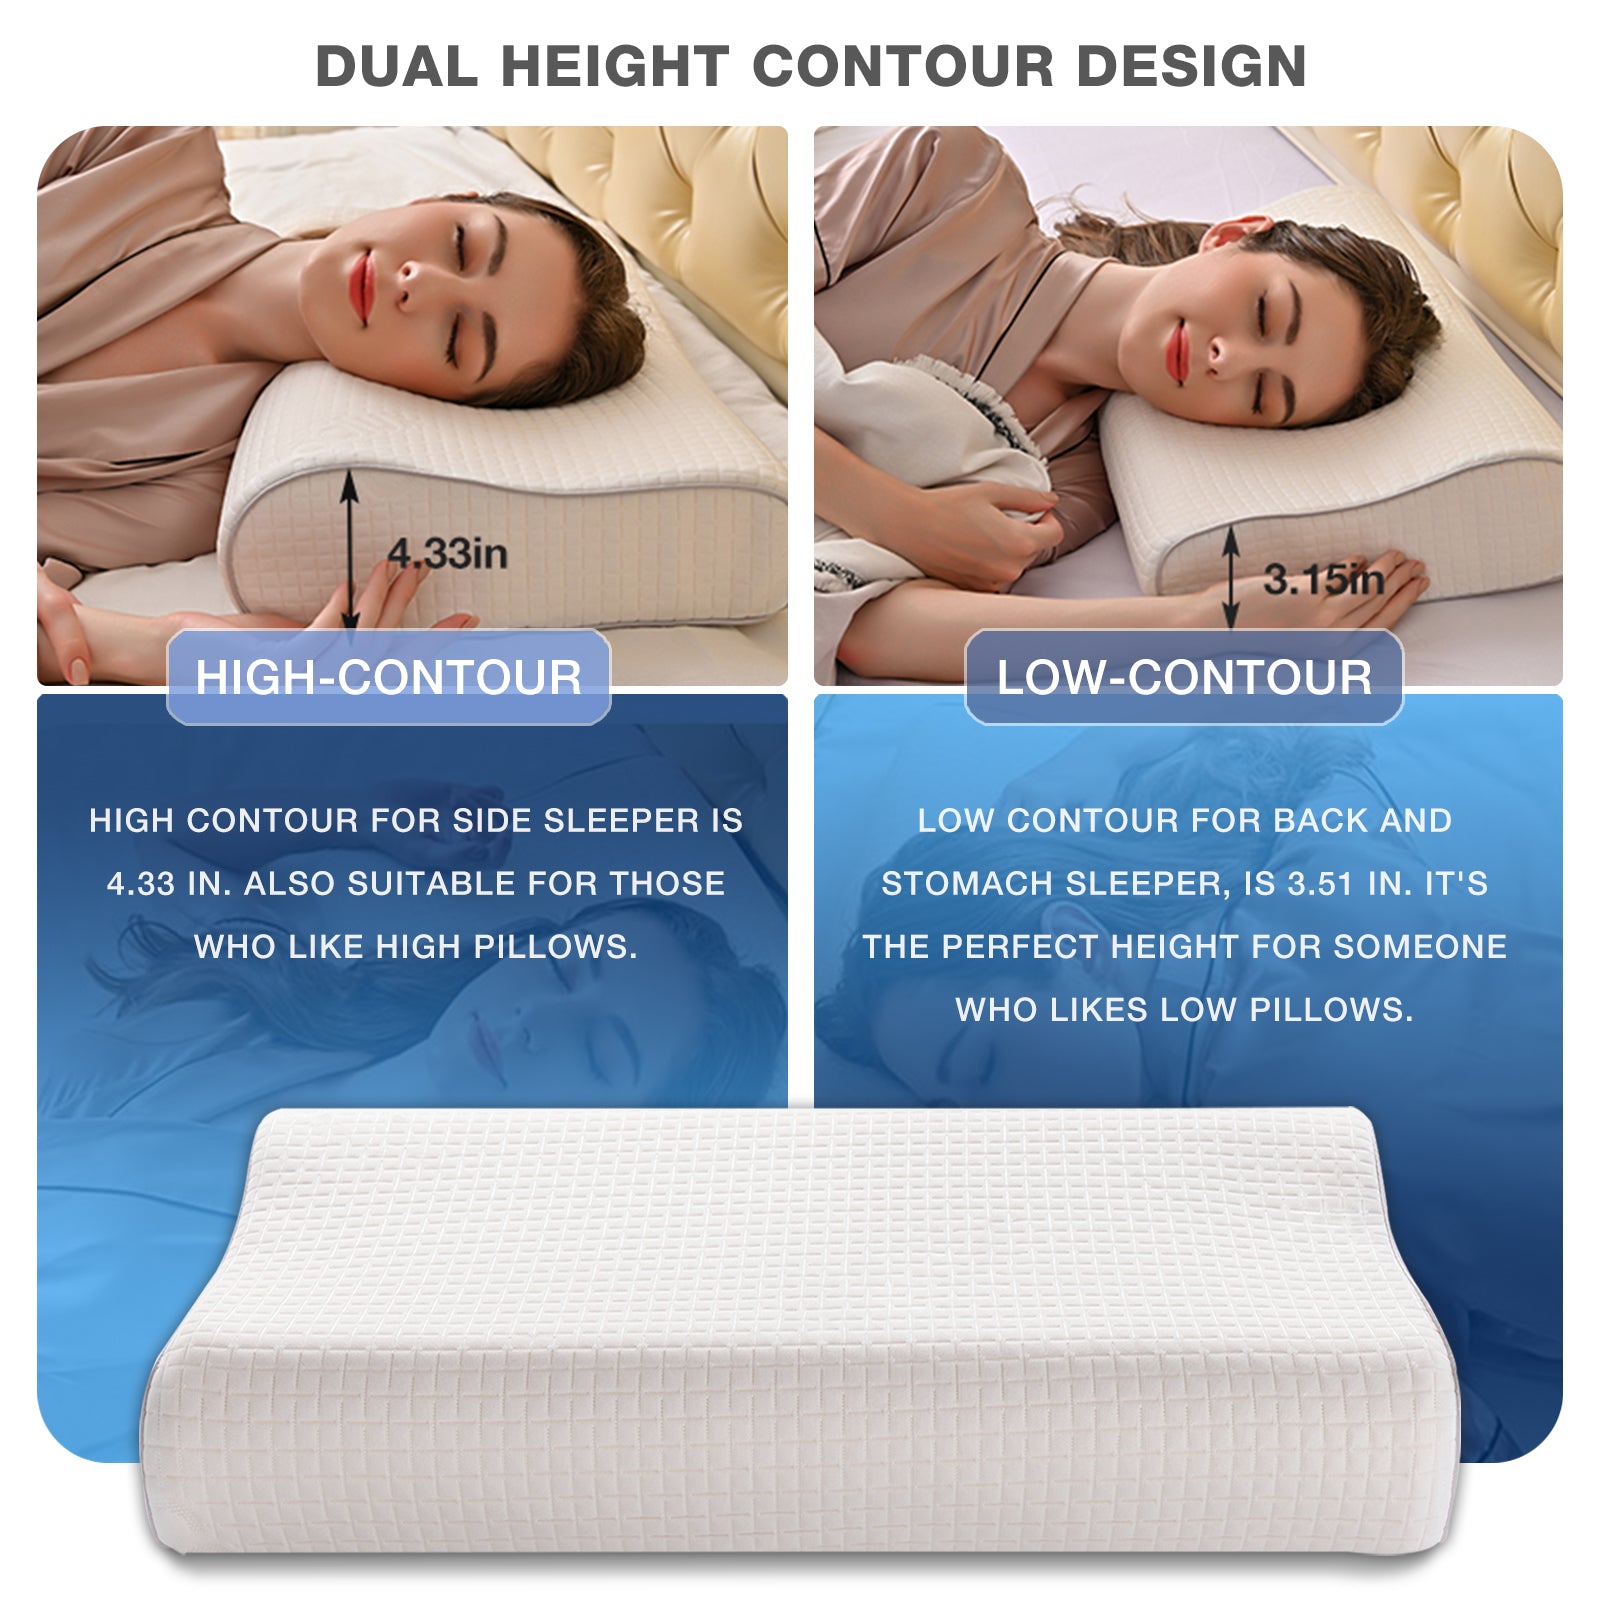 UlikTree Neck and Cervical Pillow Memory Foam Pillow for Neck and Shoulder Pain Relief Bed Sleeping Contoured Support Pillow for Side Sleepers, Back and Stomach Sleepers